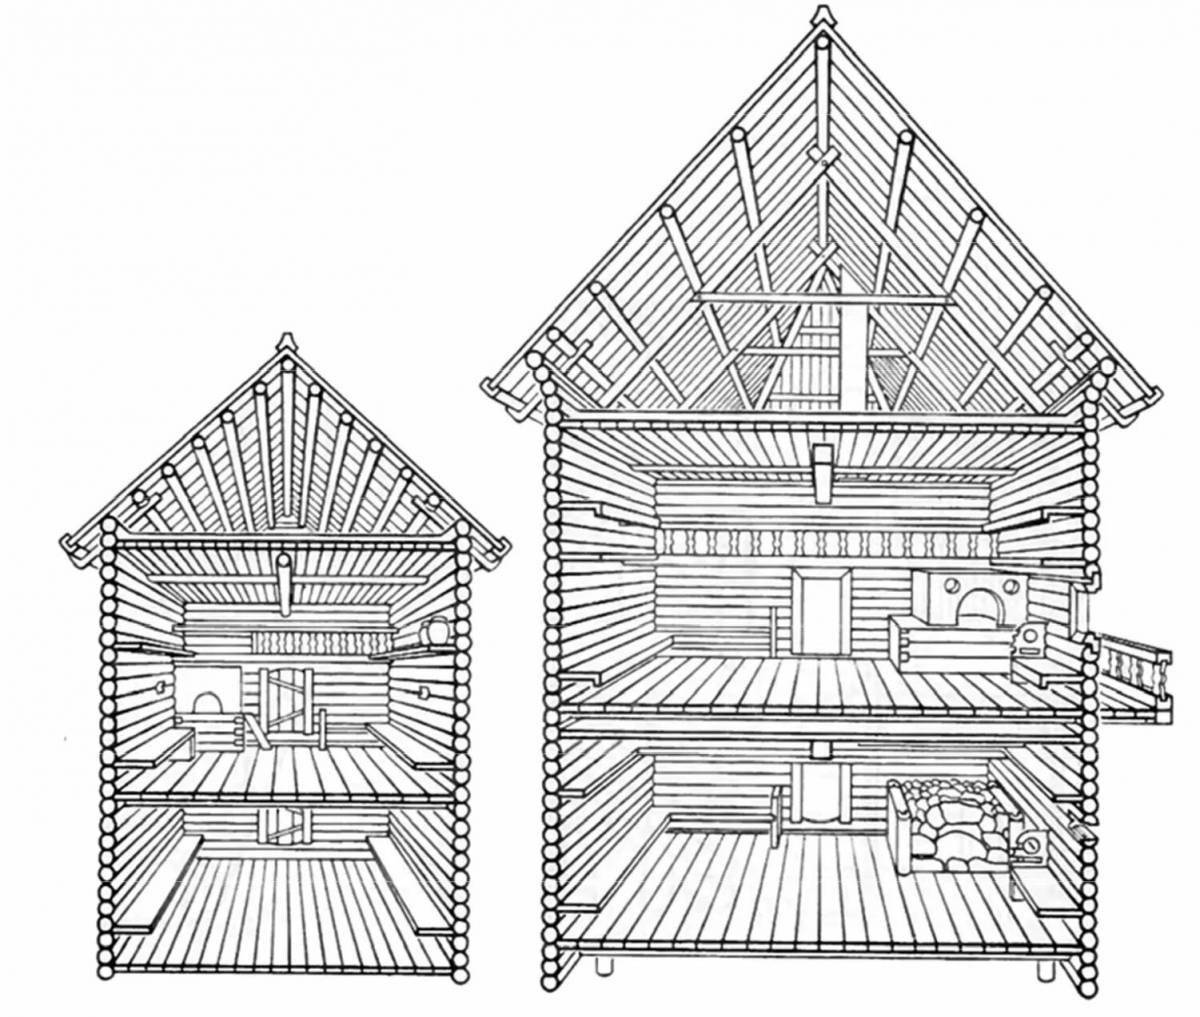 A charming hut inside the coloring book